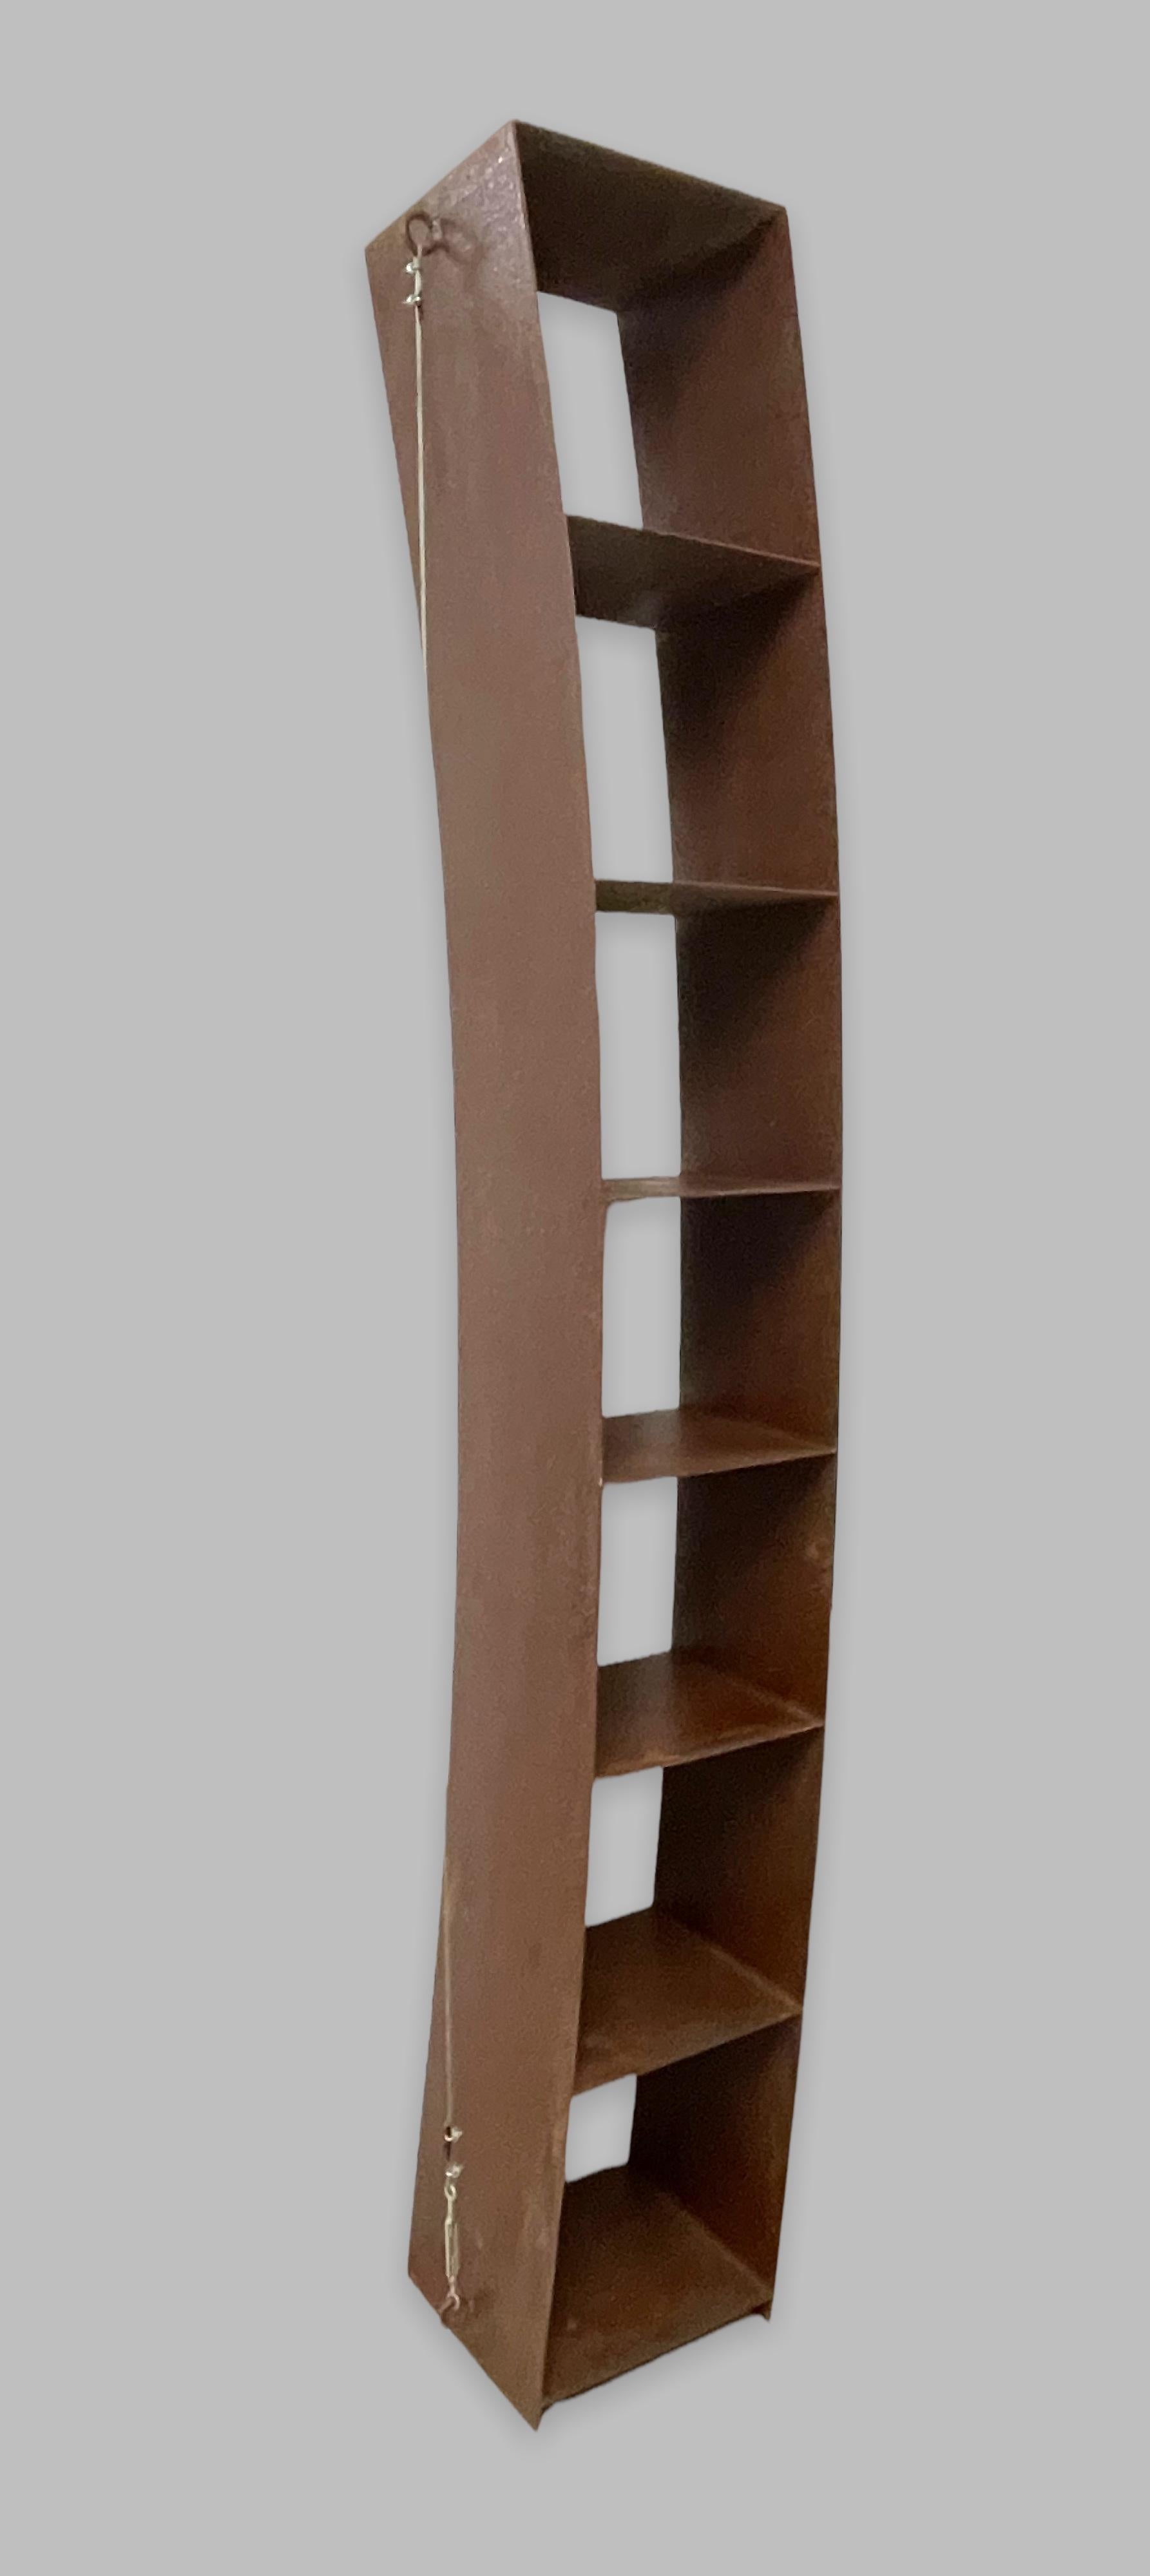 Fantastic object designed by Wolfgang Laubersheimer and produced by Pentagon Group, Germany, 1984.

This bookcase, called 